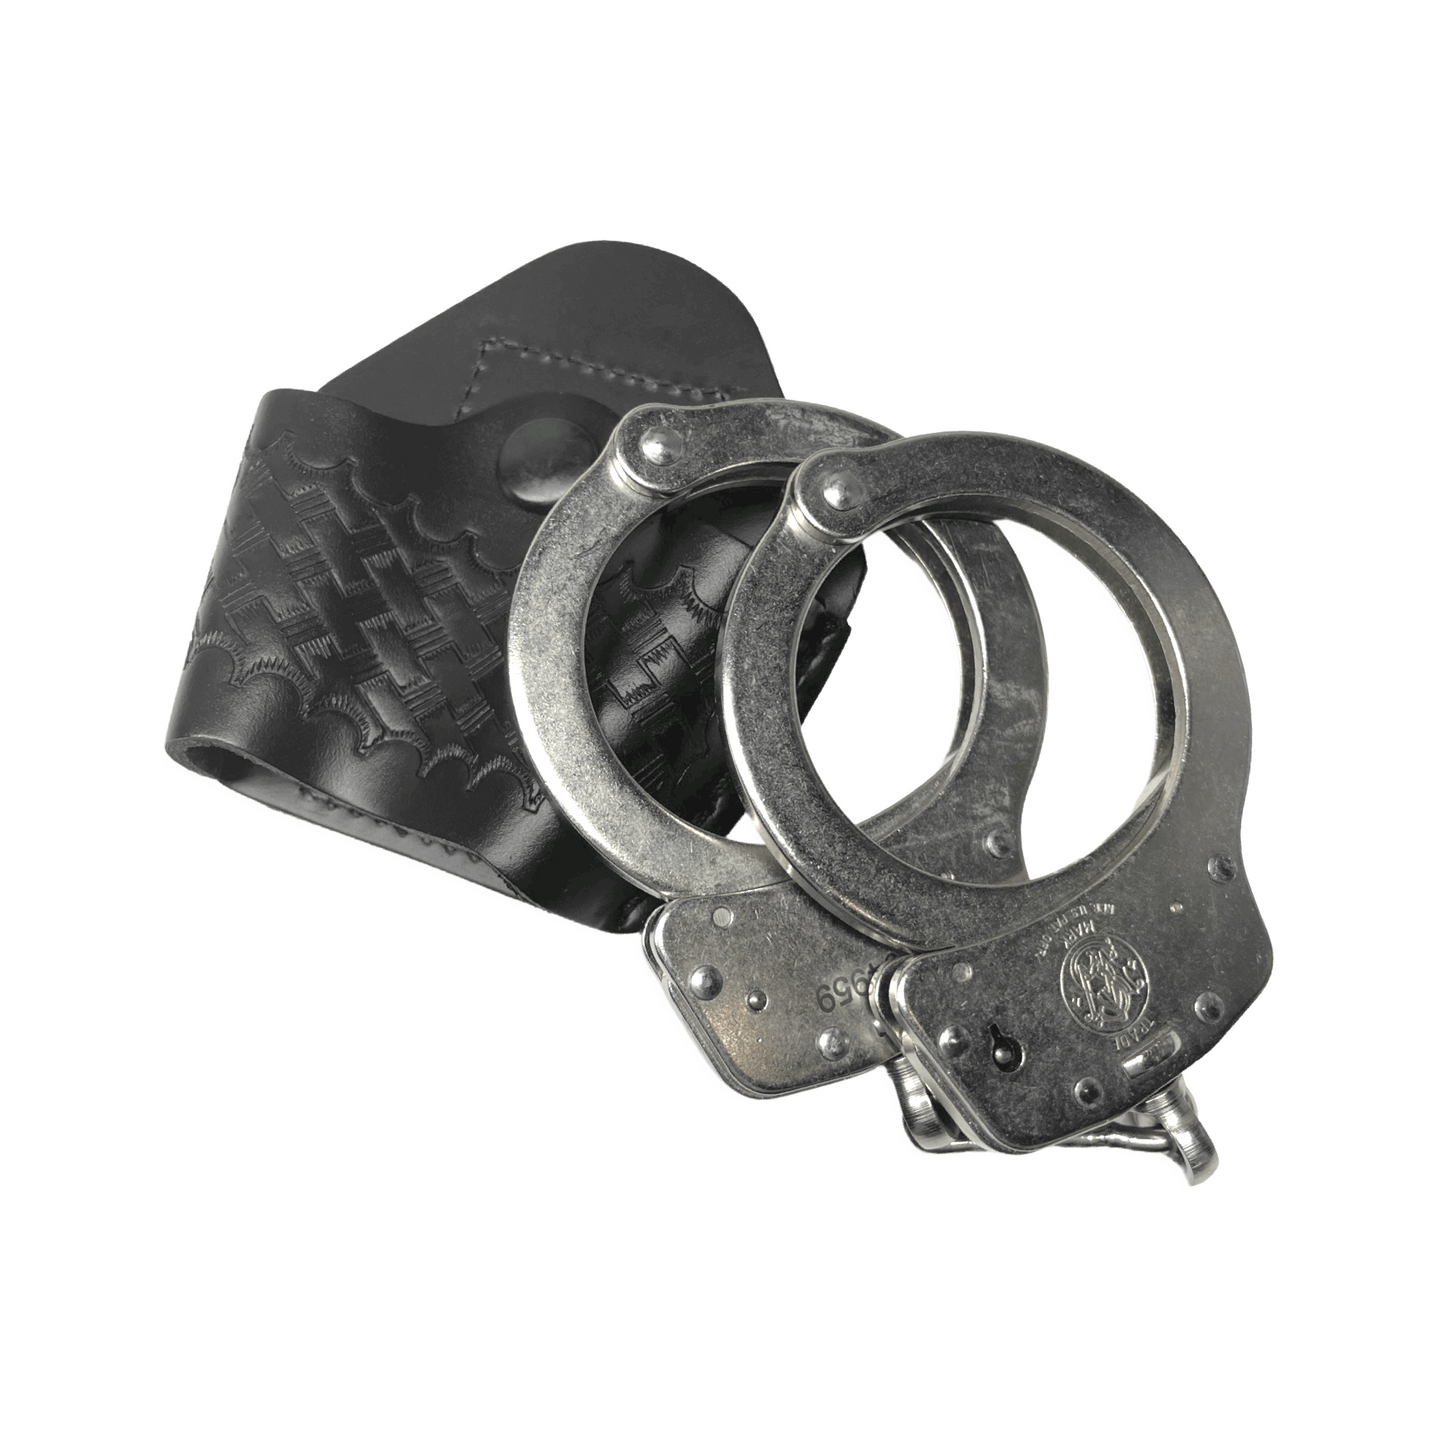 Open Top Handcuff Case-Perfect Fit-911 Duty Gear USA